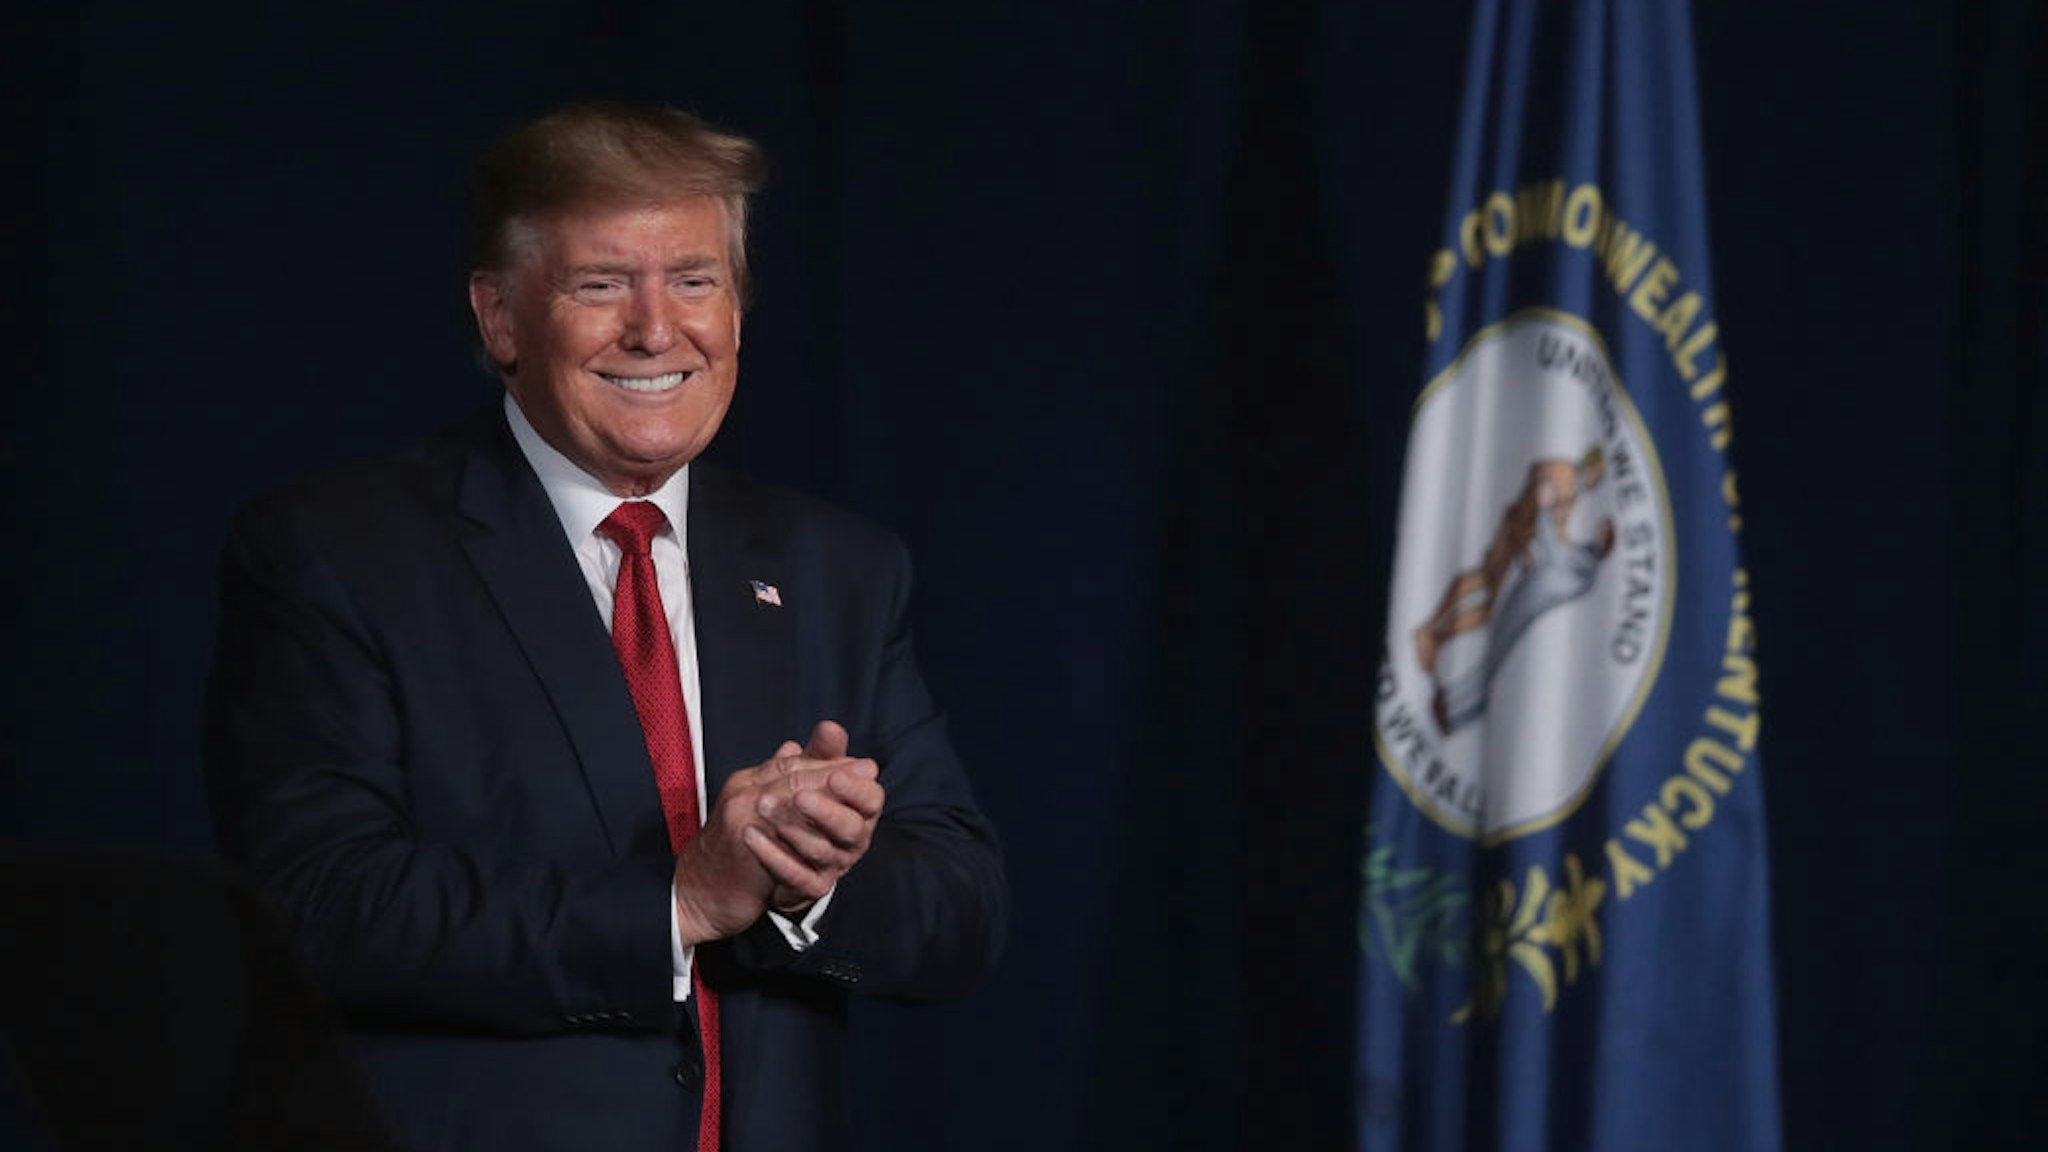 LOUISVILLE, KENTUCKY - AUGUST 21: President Donald Trump speaks to guests during the Joint Opening Ceremony at the American Veterans (AMVETS) 75th National Convention at the Galt House on August 21, 2019 in Louisville, Kentucky. AMVETS is a non-partisan, volunteer-led veterans advocacy organization that was formed by World War II veterans.